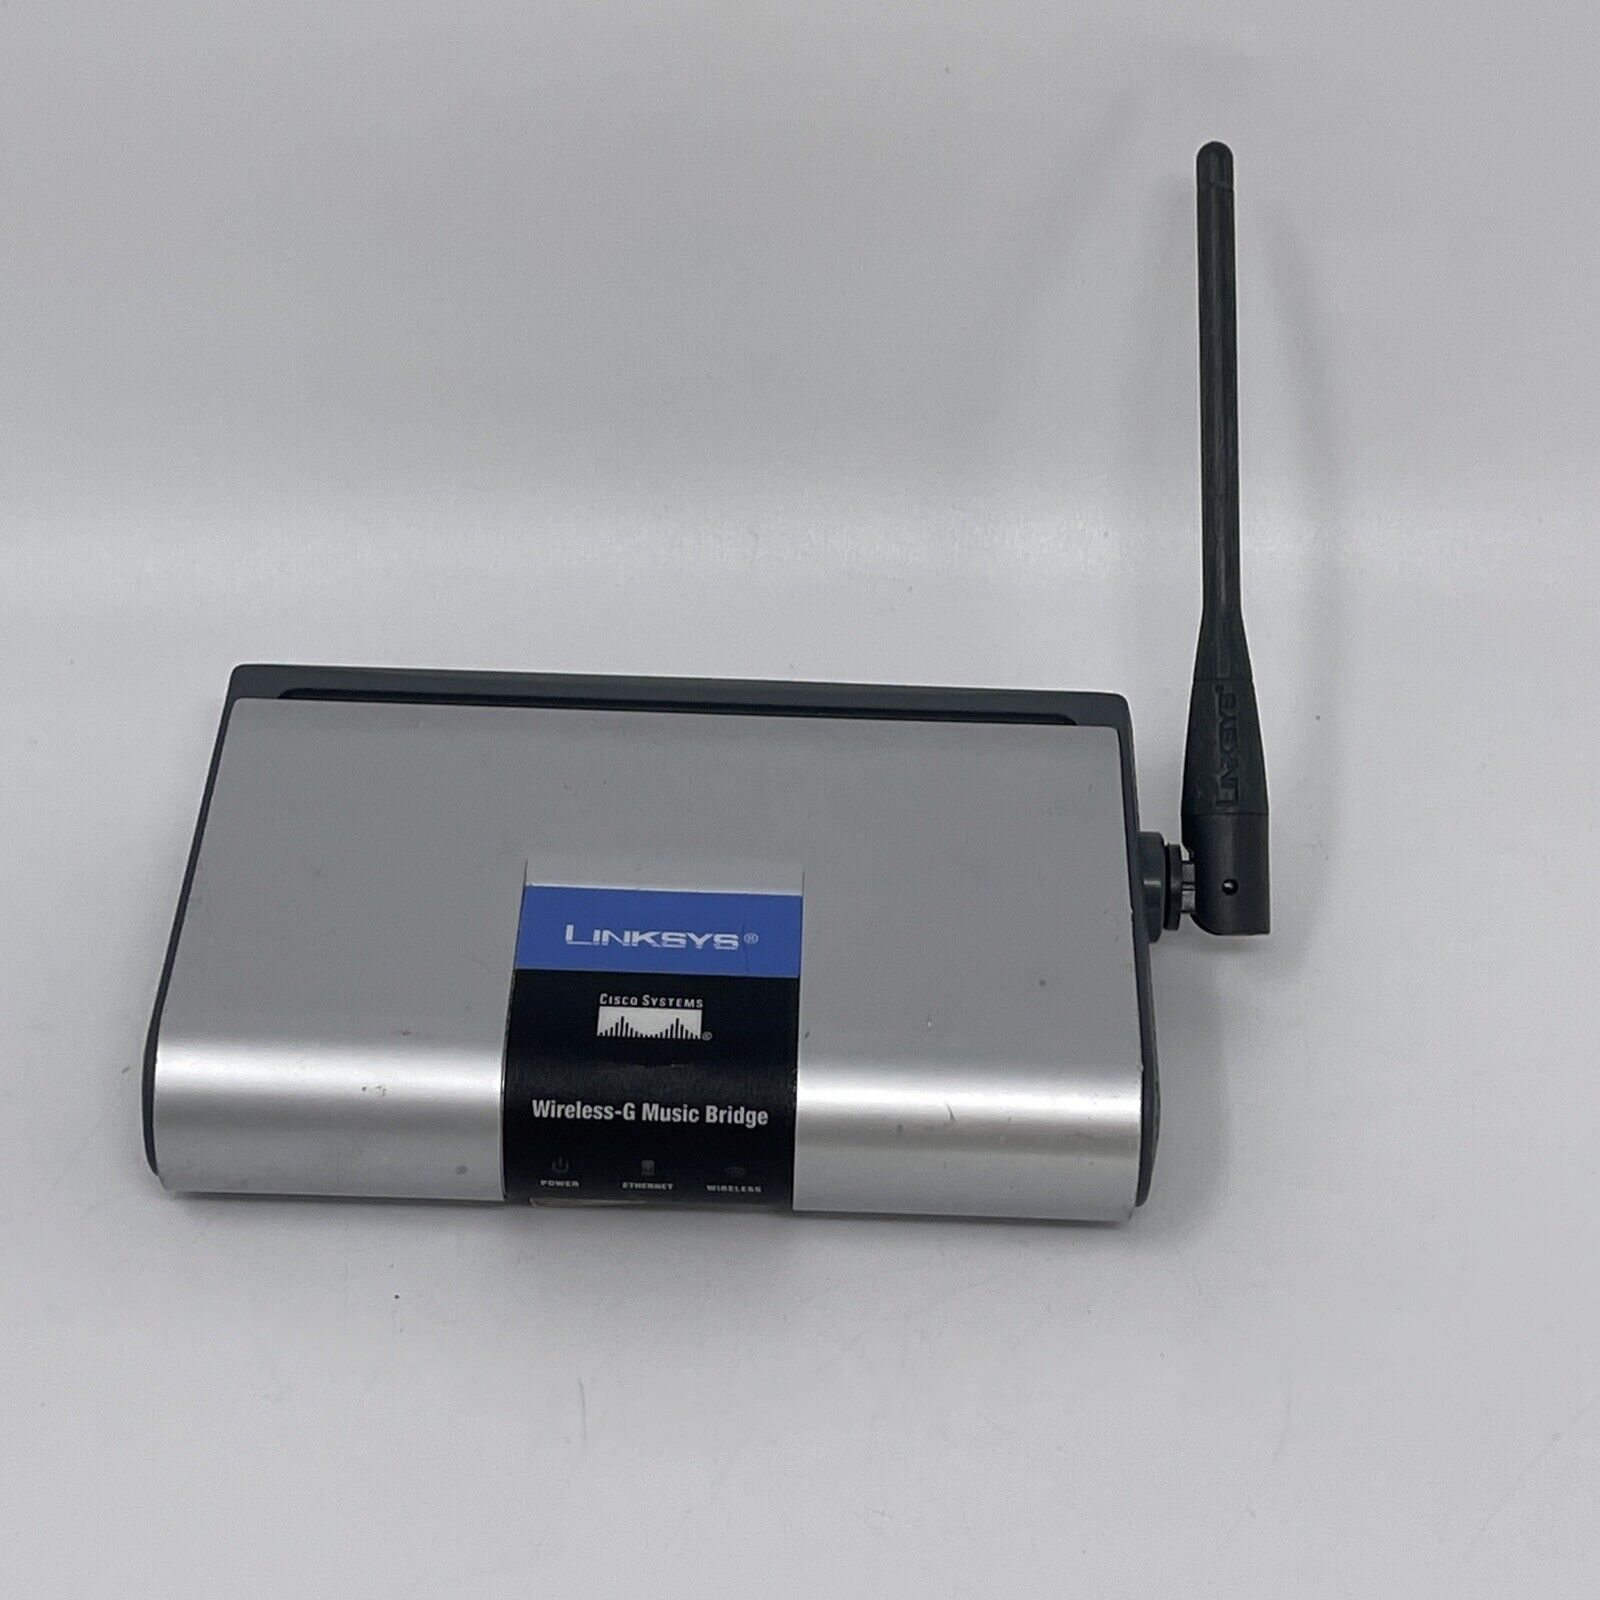 Cisco-Linksys WMB54G Wireless-G Music Bridge Adapter Router Only - No Cables